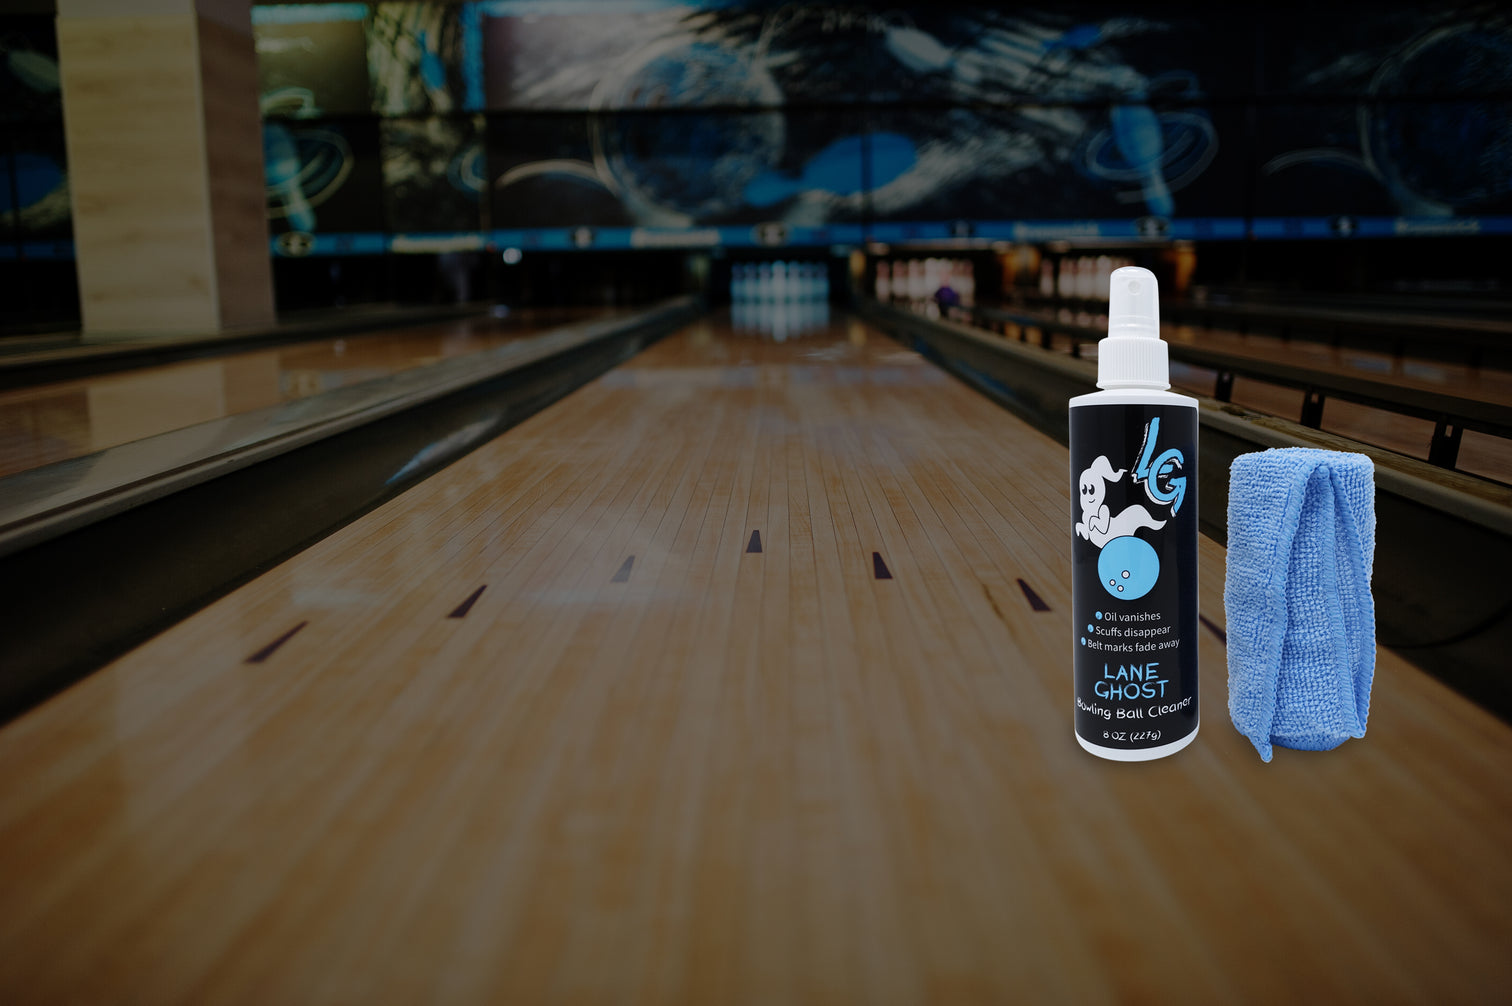 Lane Ghost Bowling Ball Cleaner